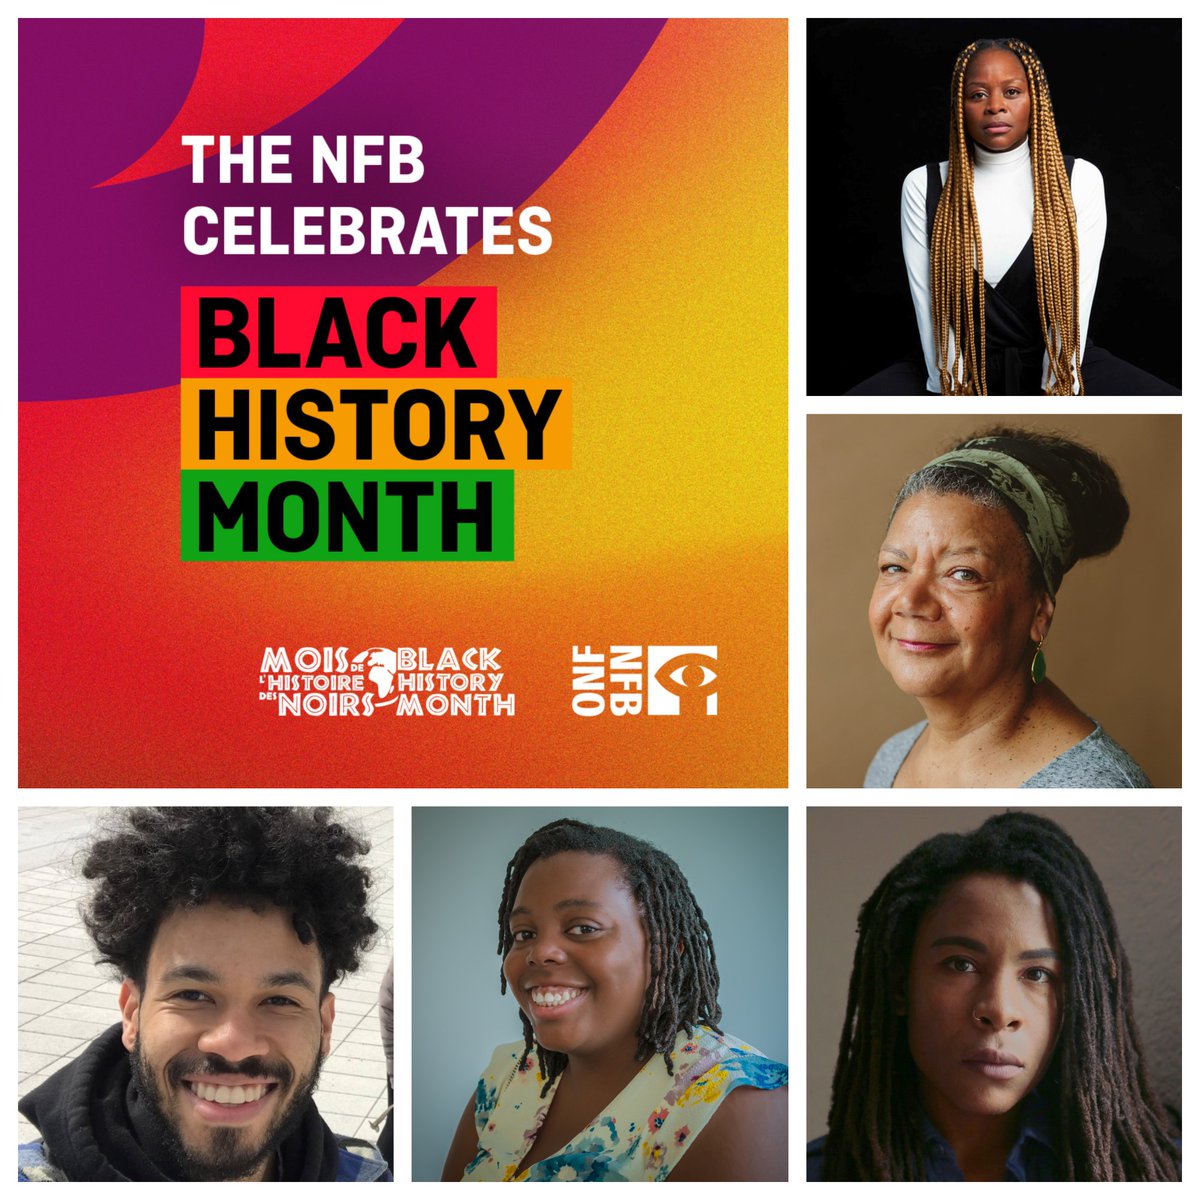 Our #BlackHistoryMonth celebrations continue! ✌🏿🎉 Don't miss these upcoming virtual discussions with filmmakers @val_bah, Tatiana Zinga Botao, @cdfoggo, Bogdan Anifrani-Fedach and @josianefilms → bit.ly/BHM23nfb #BHM2023 #NFB